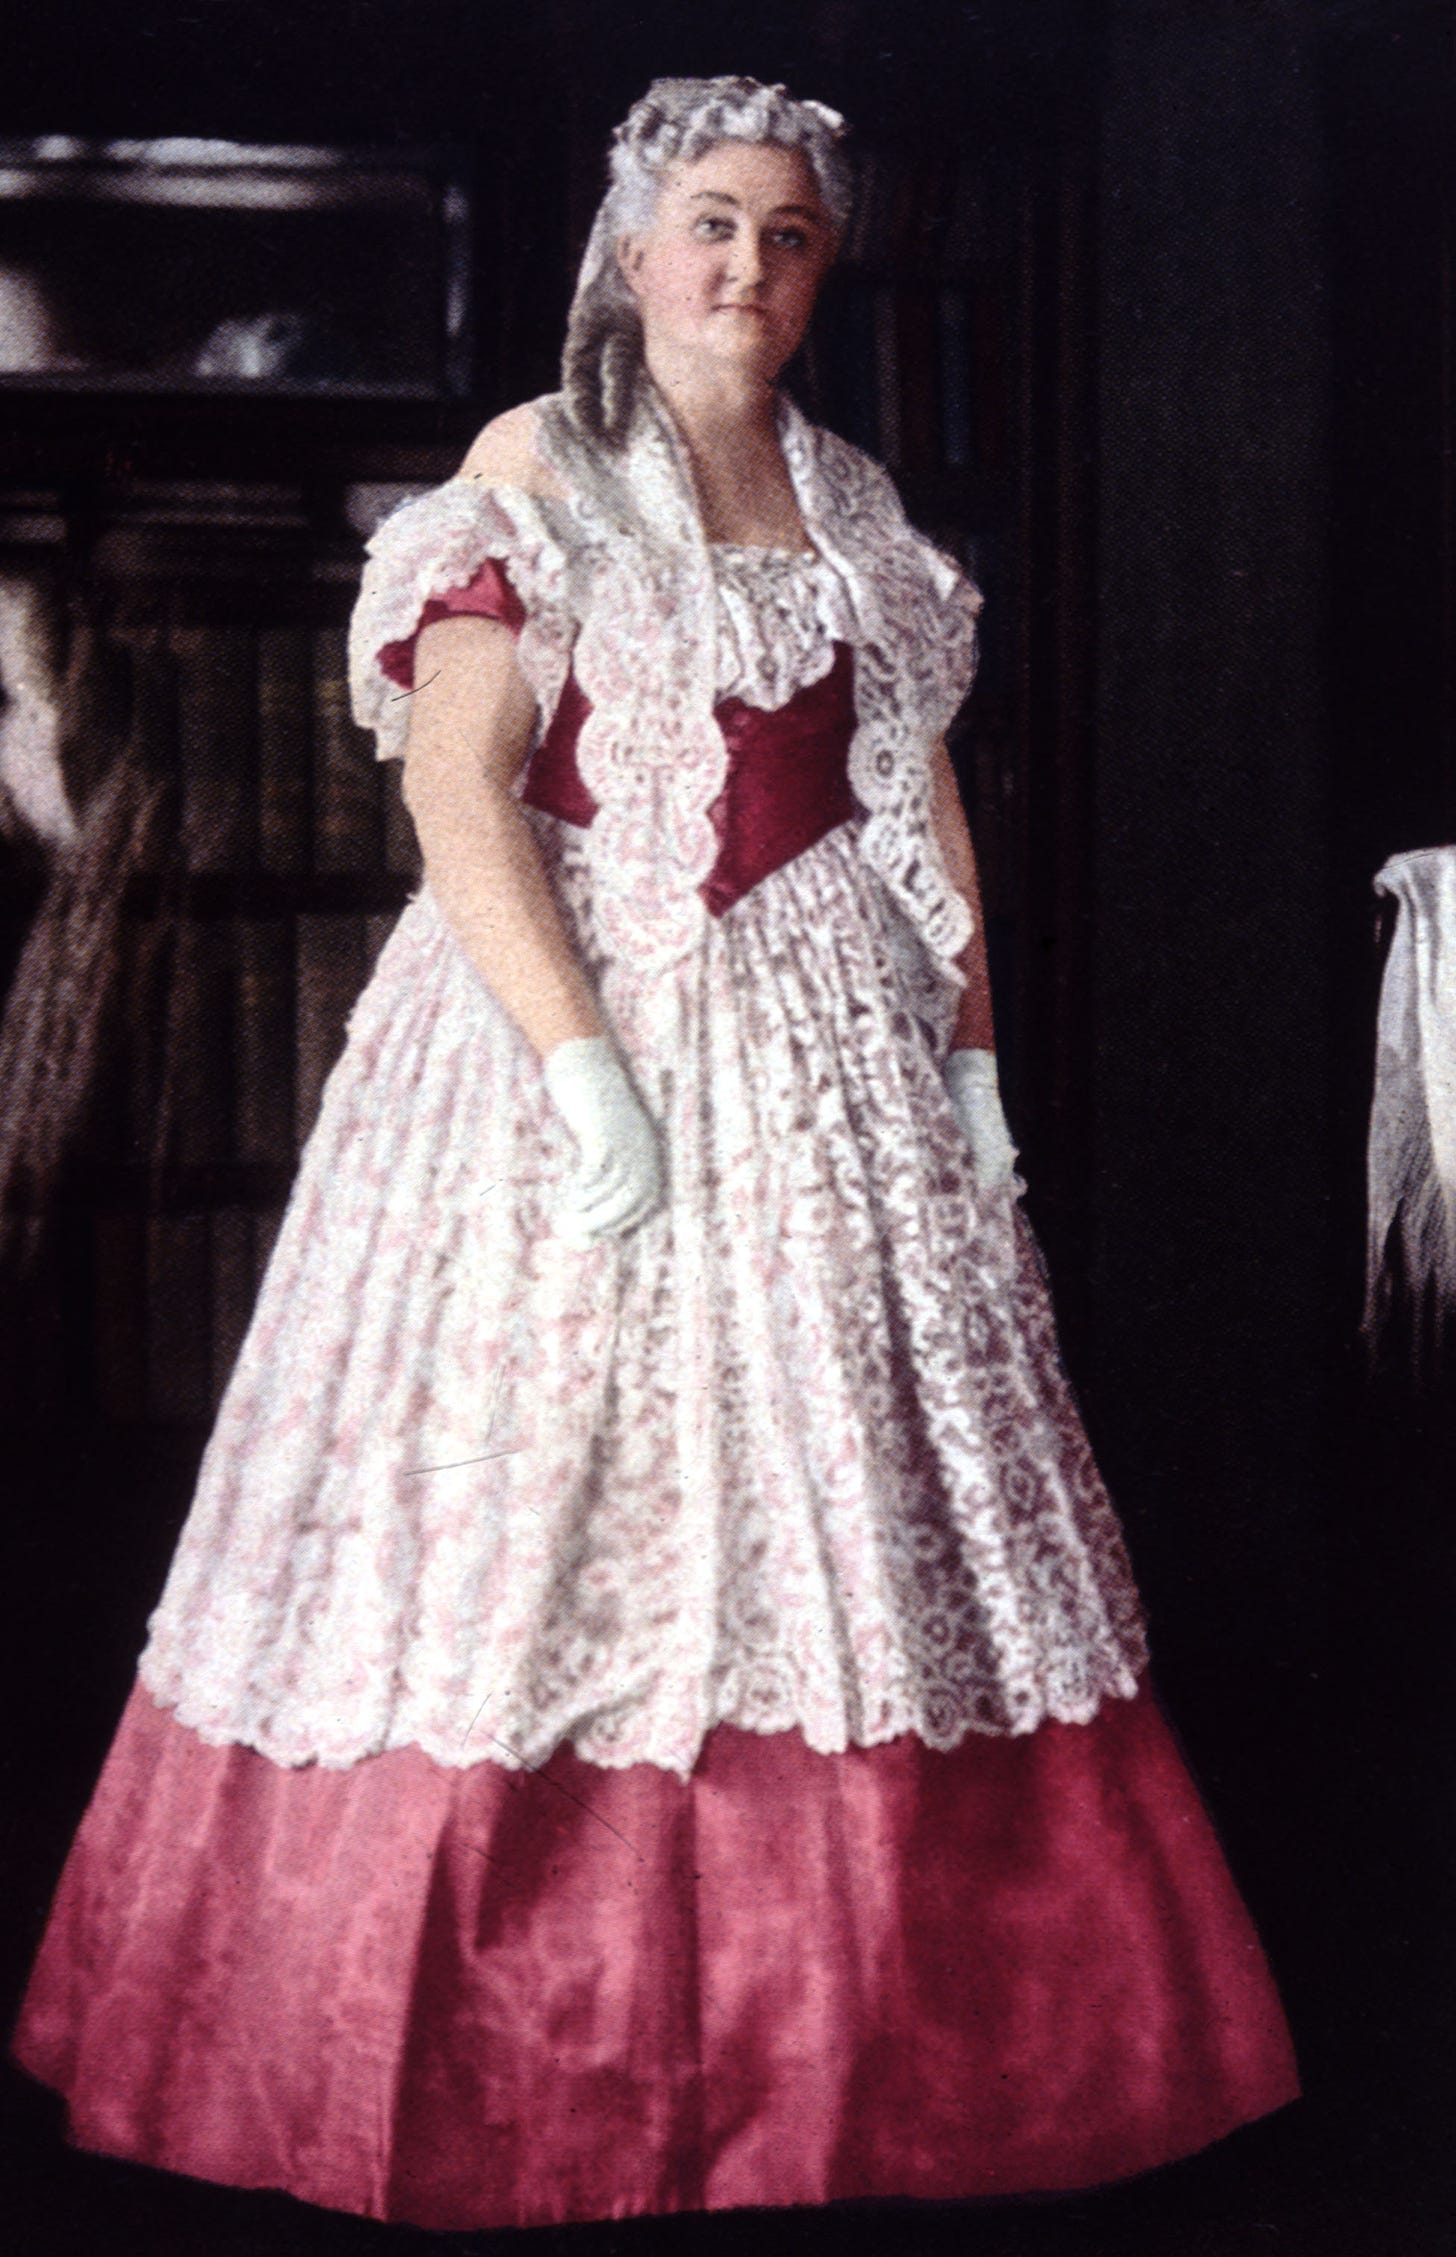 Mildred Rutherford in costume